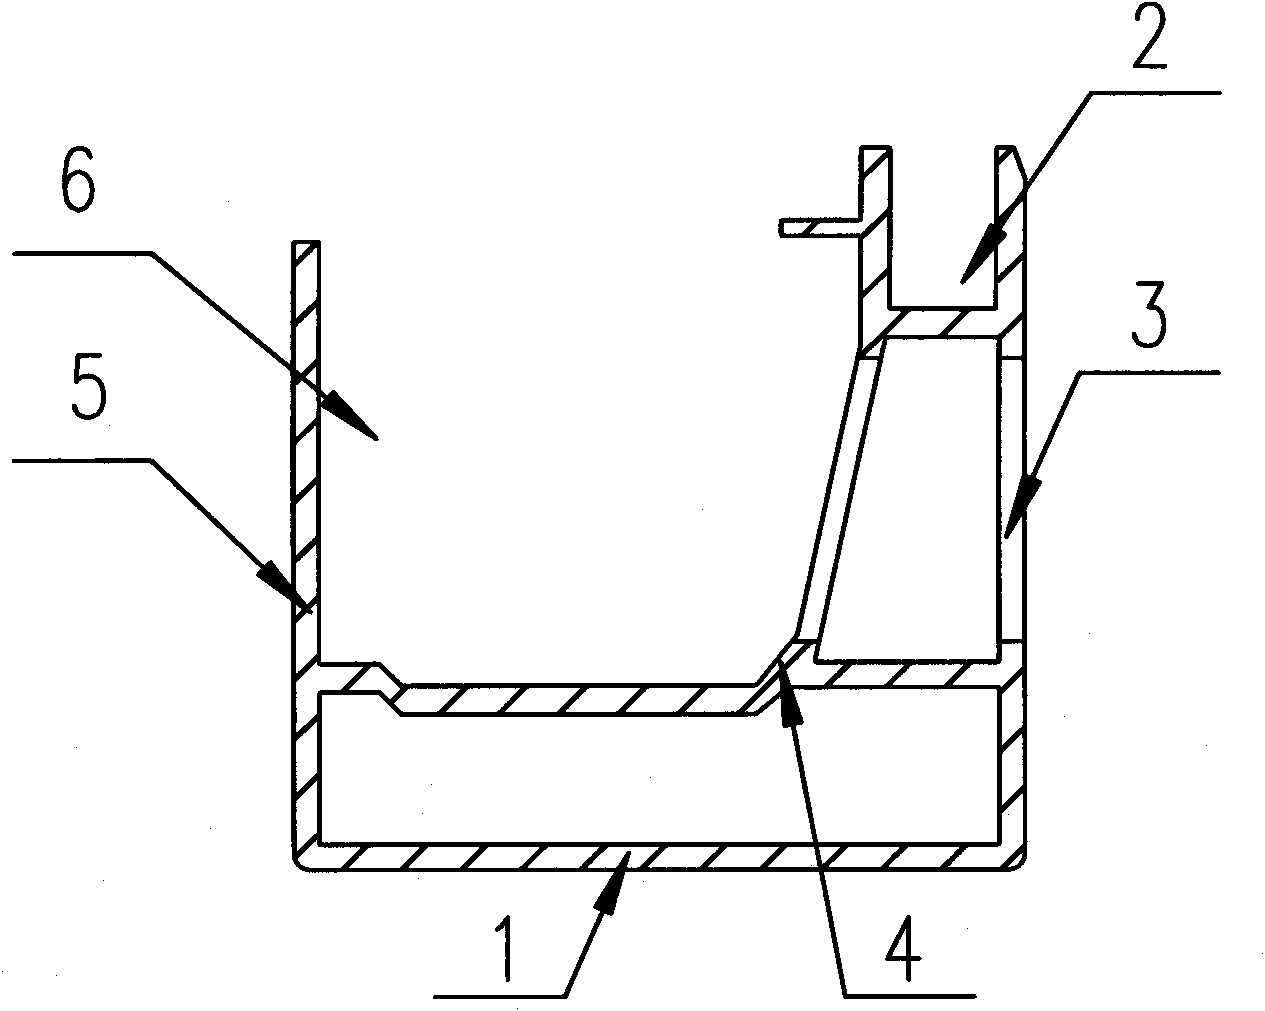 Profile for forming solar photovoltaic component border